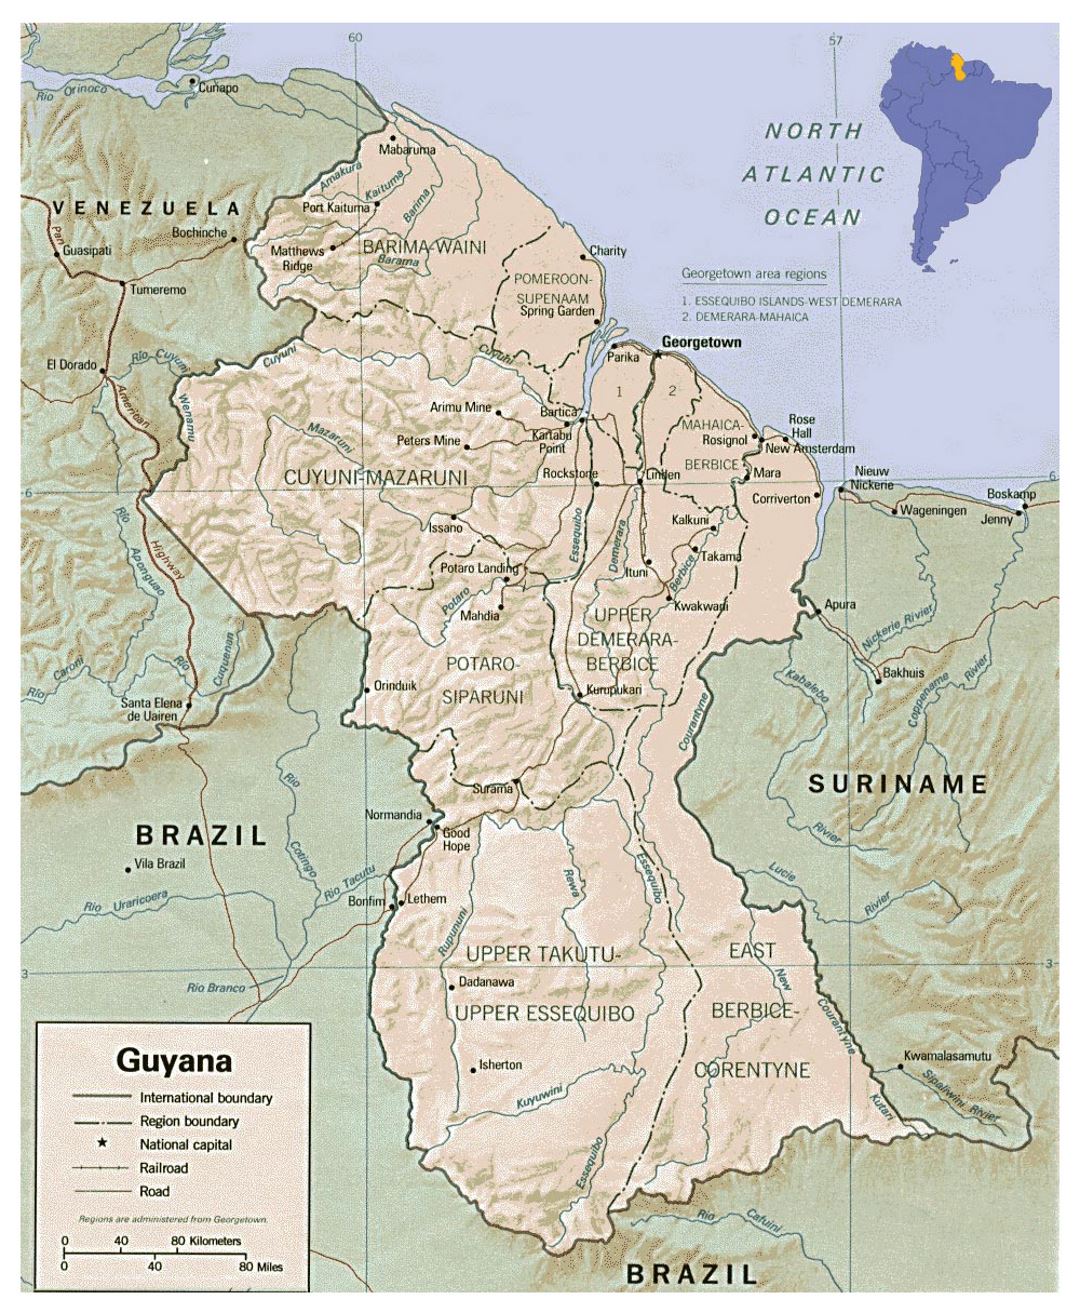 Detailed political and administrative map of Guyana with relief, roads and cities